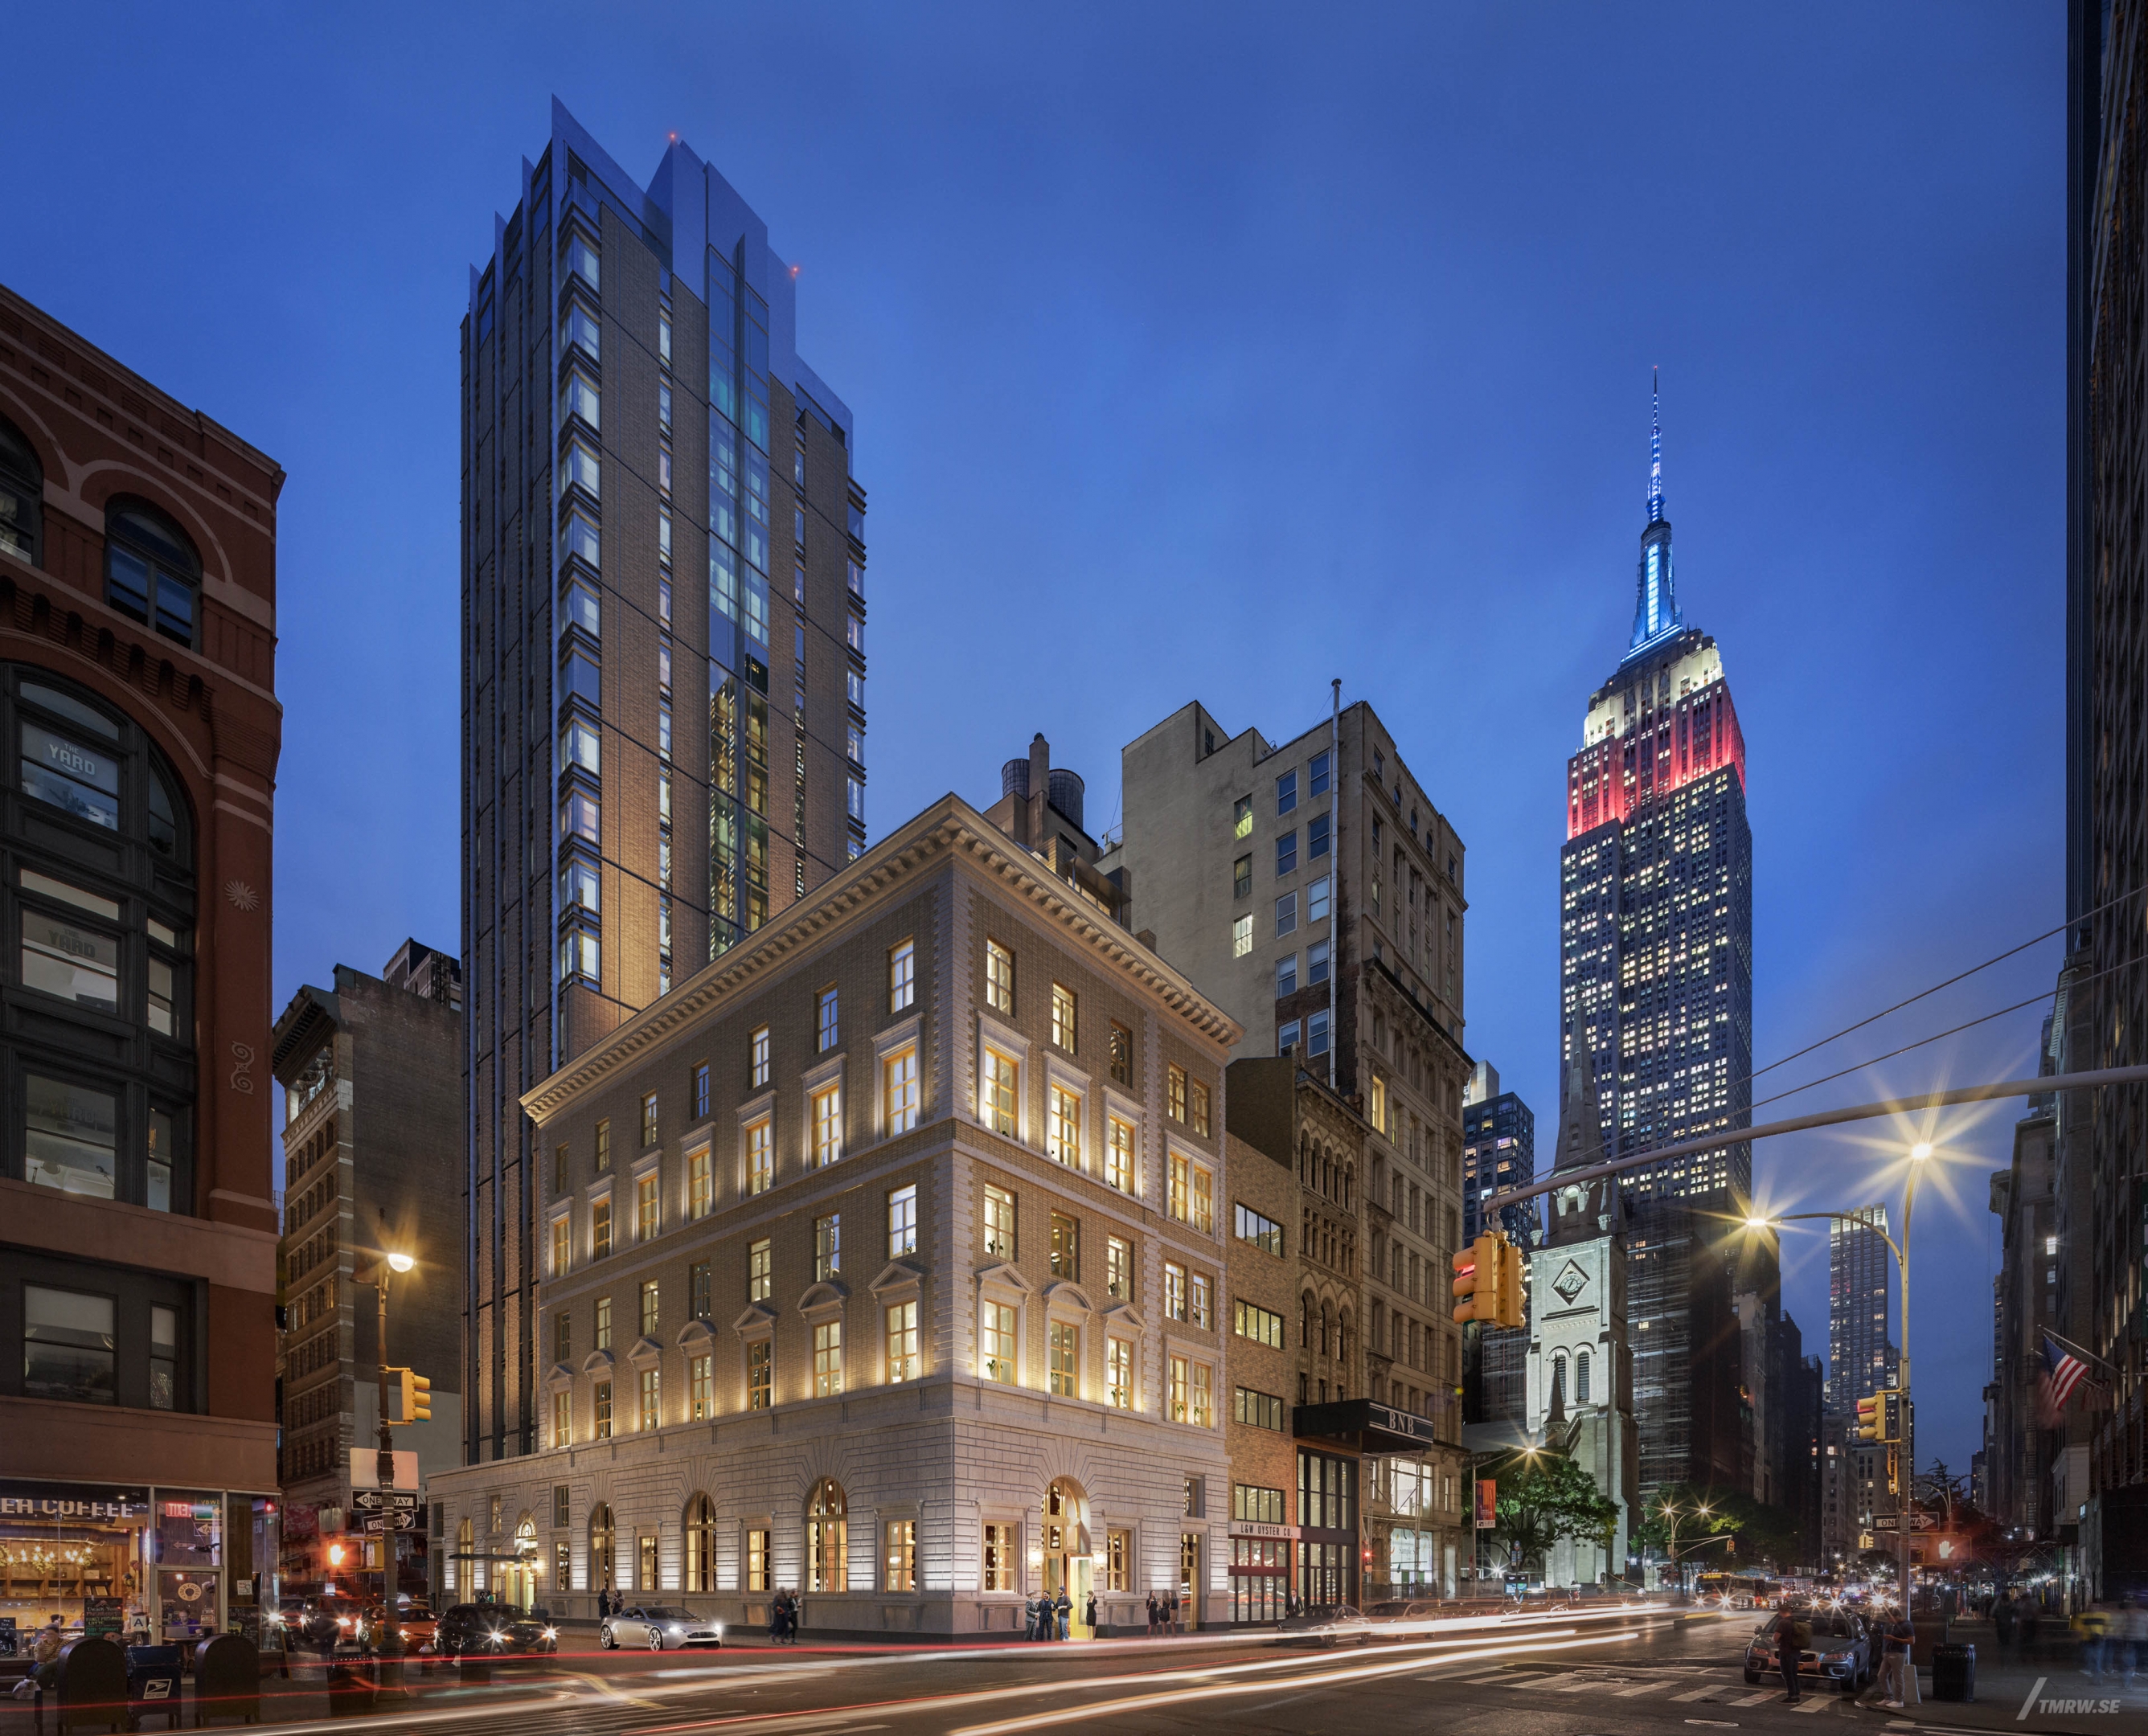 Architectural visualization of Flaneur Hospitality for Perkins Eastman, exterior of the luxury hotel company in dusk